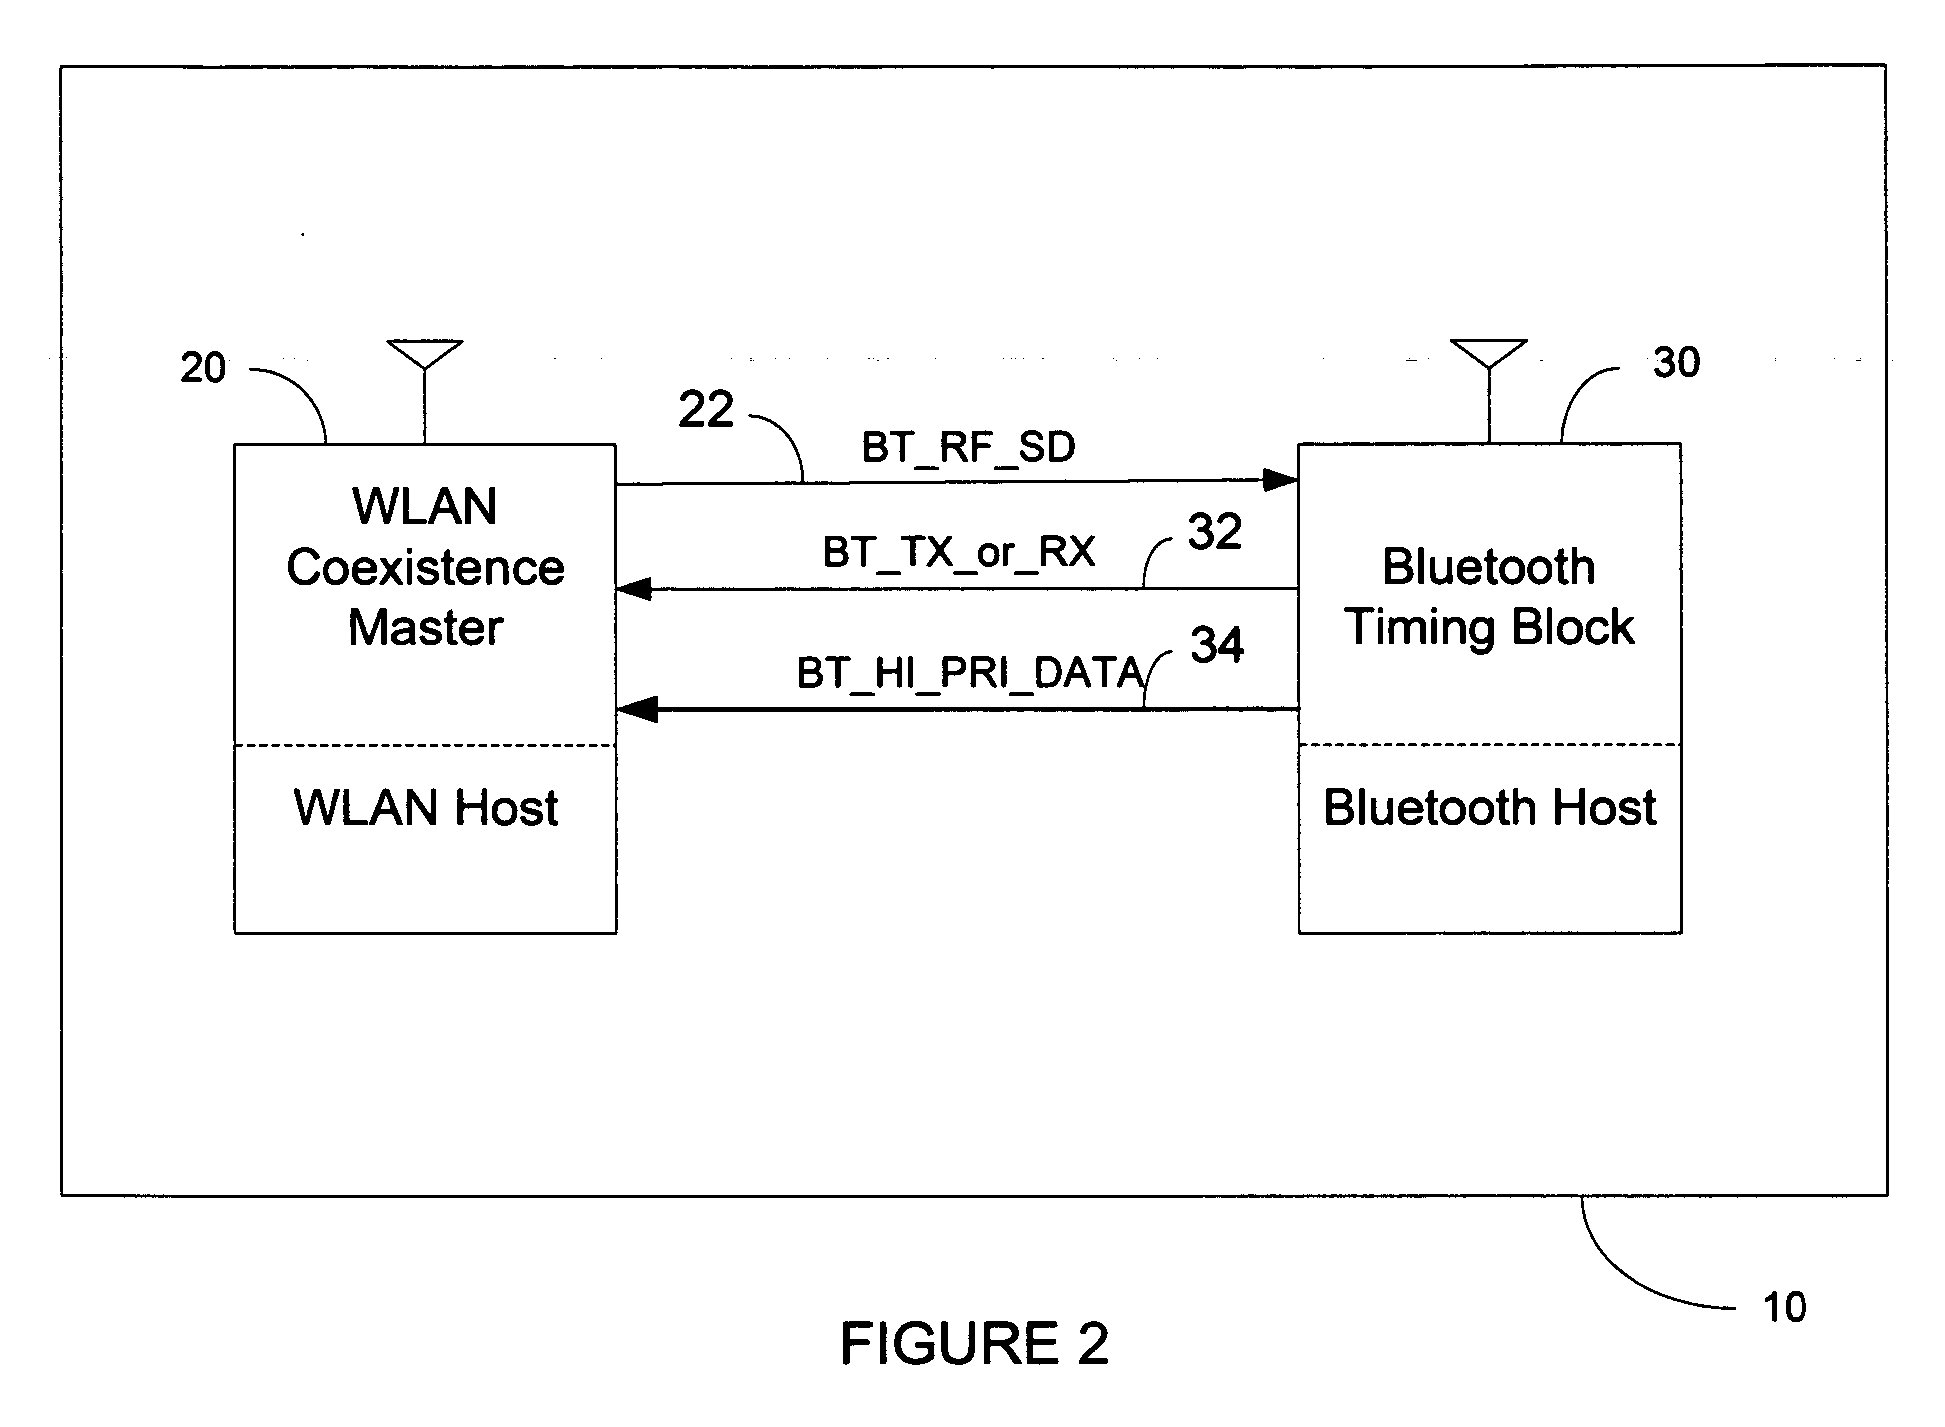 Method of wireless local area network and Bluetooth network coexistence in a collocated device